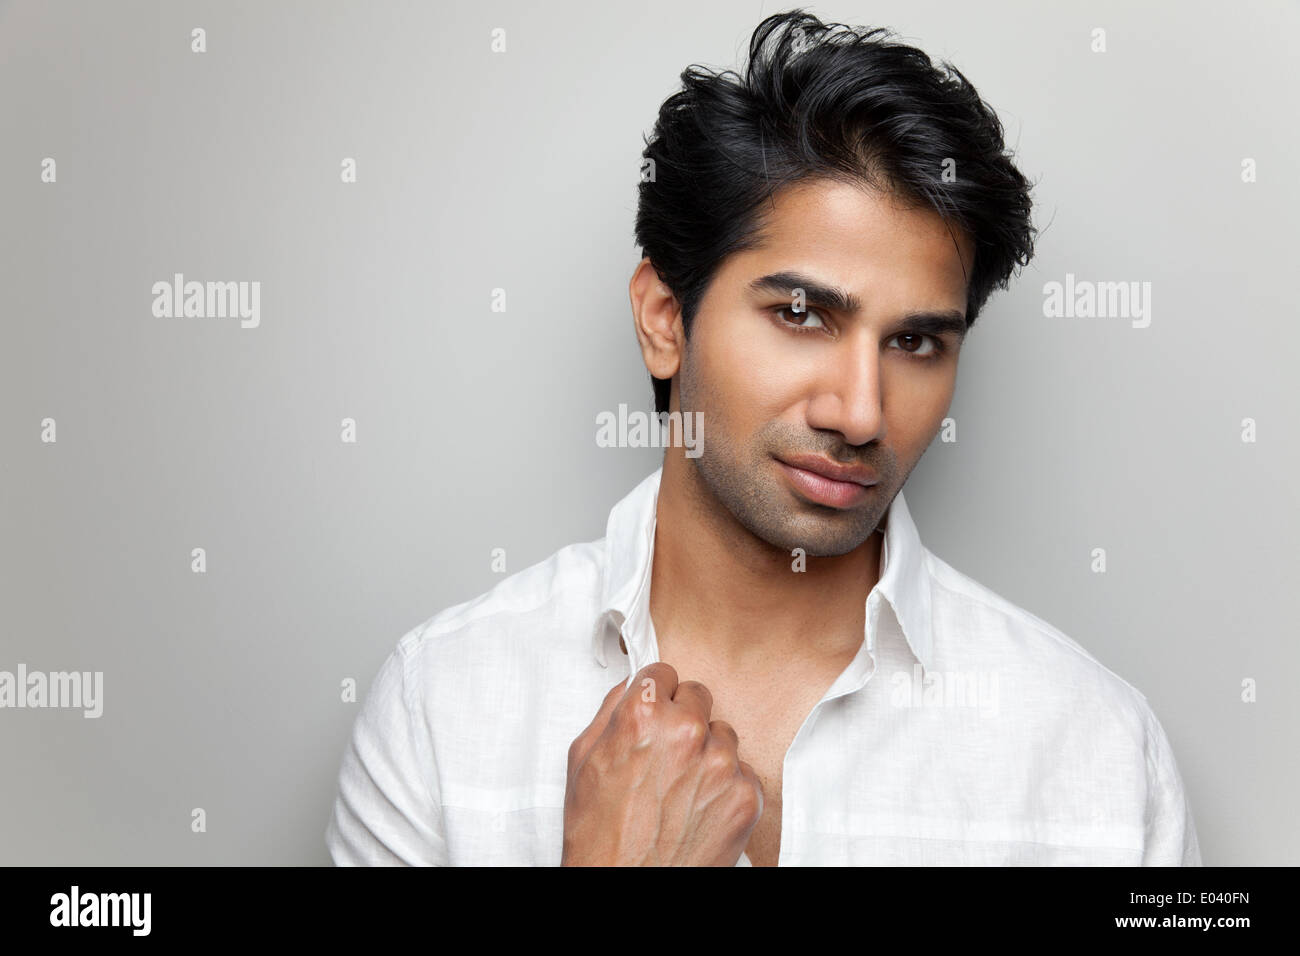 Handsome Indian man Stock Photo